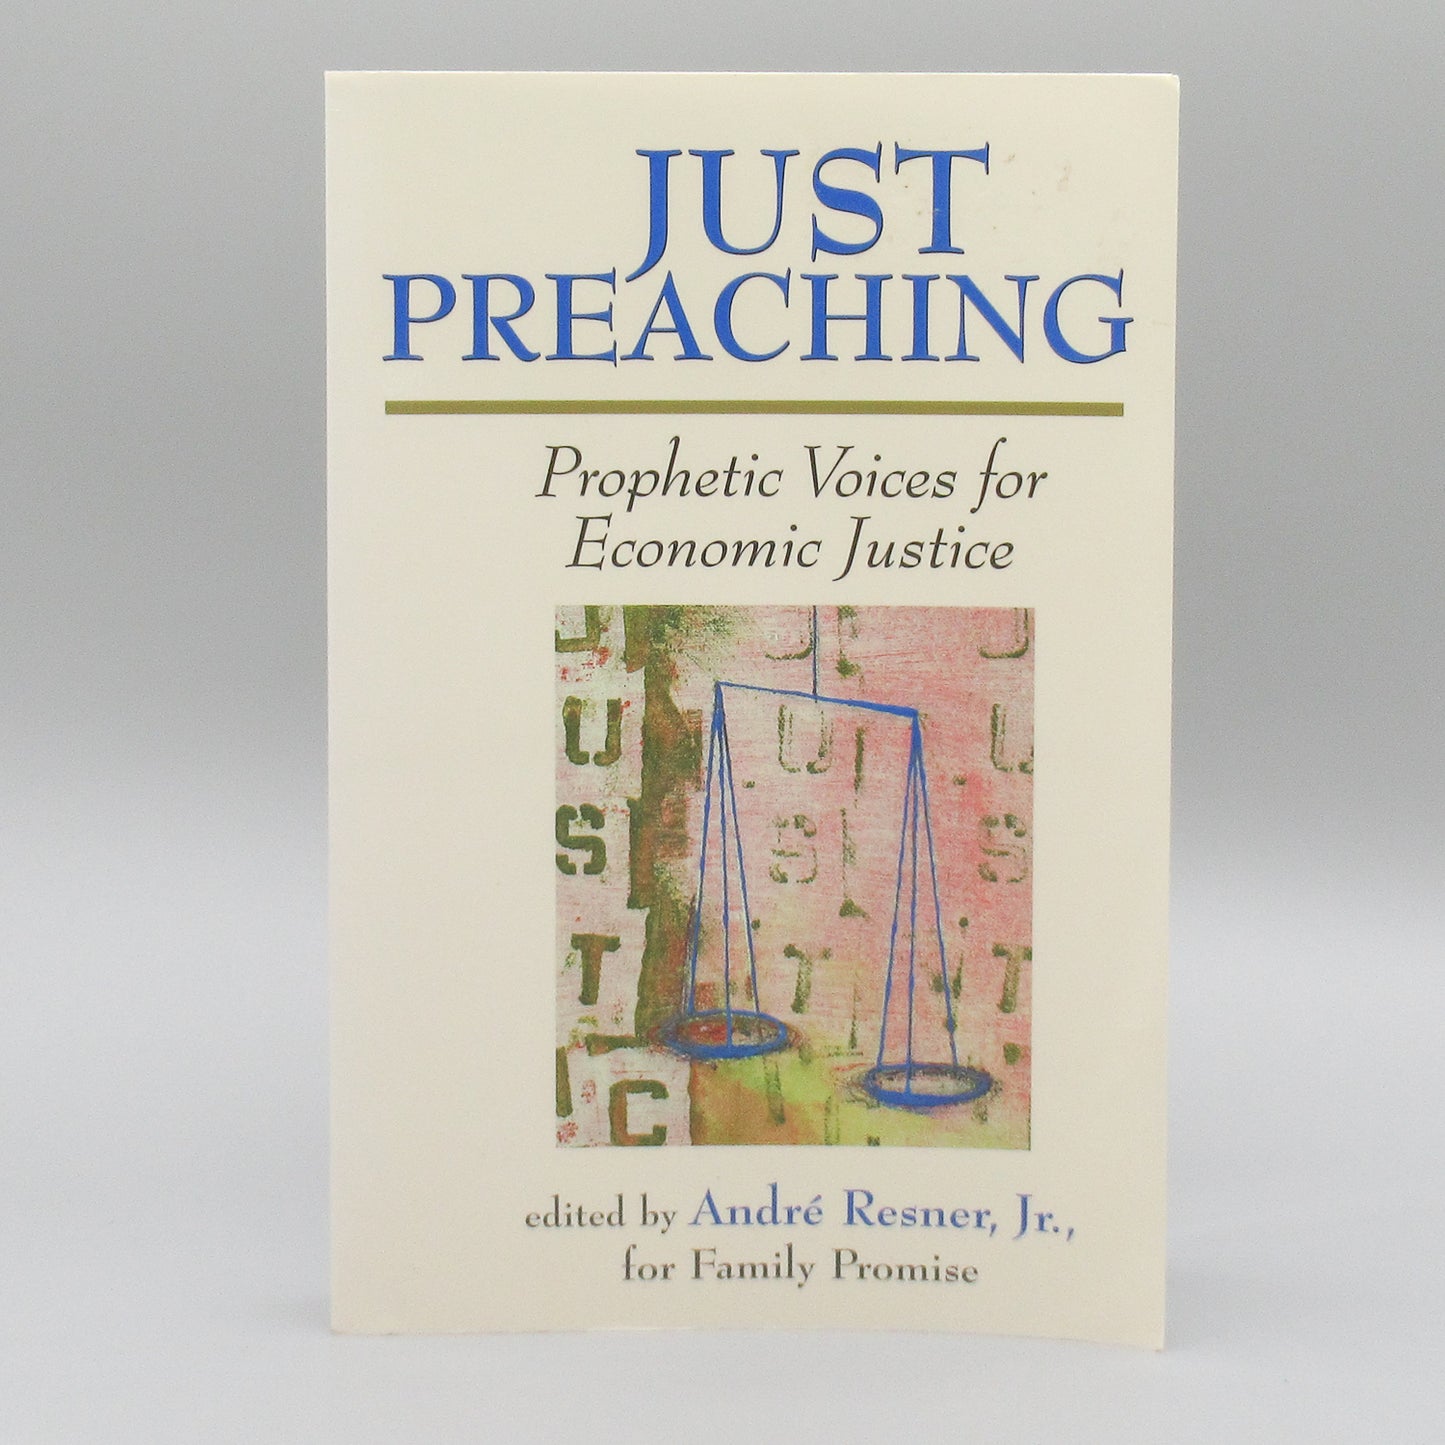 Just Preaching: Prophetic Voices for Economic Justice